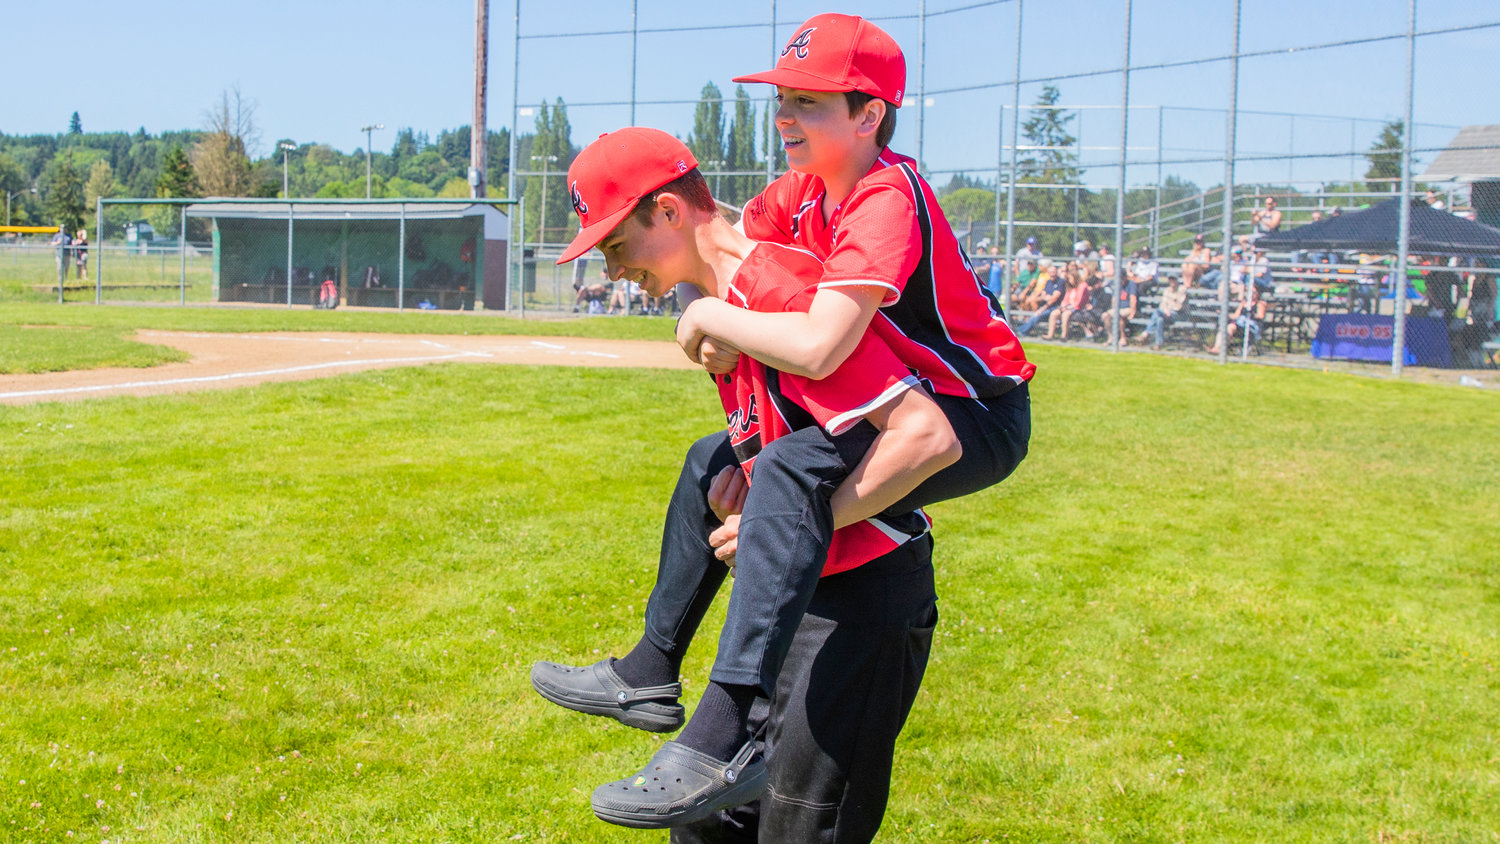 Dane Akin rides on the back of Colton Weiss as athletes walk onto the field at Stan Hedwall Park in Chehalis on Saturday.